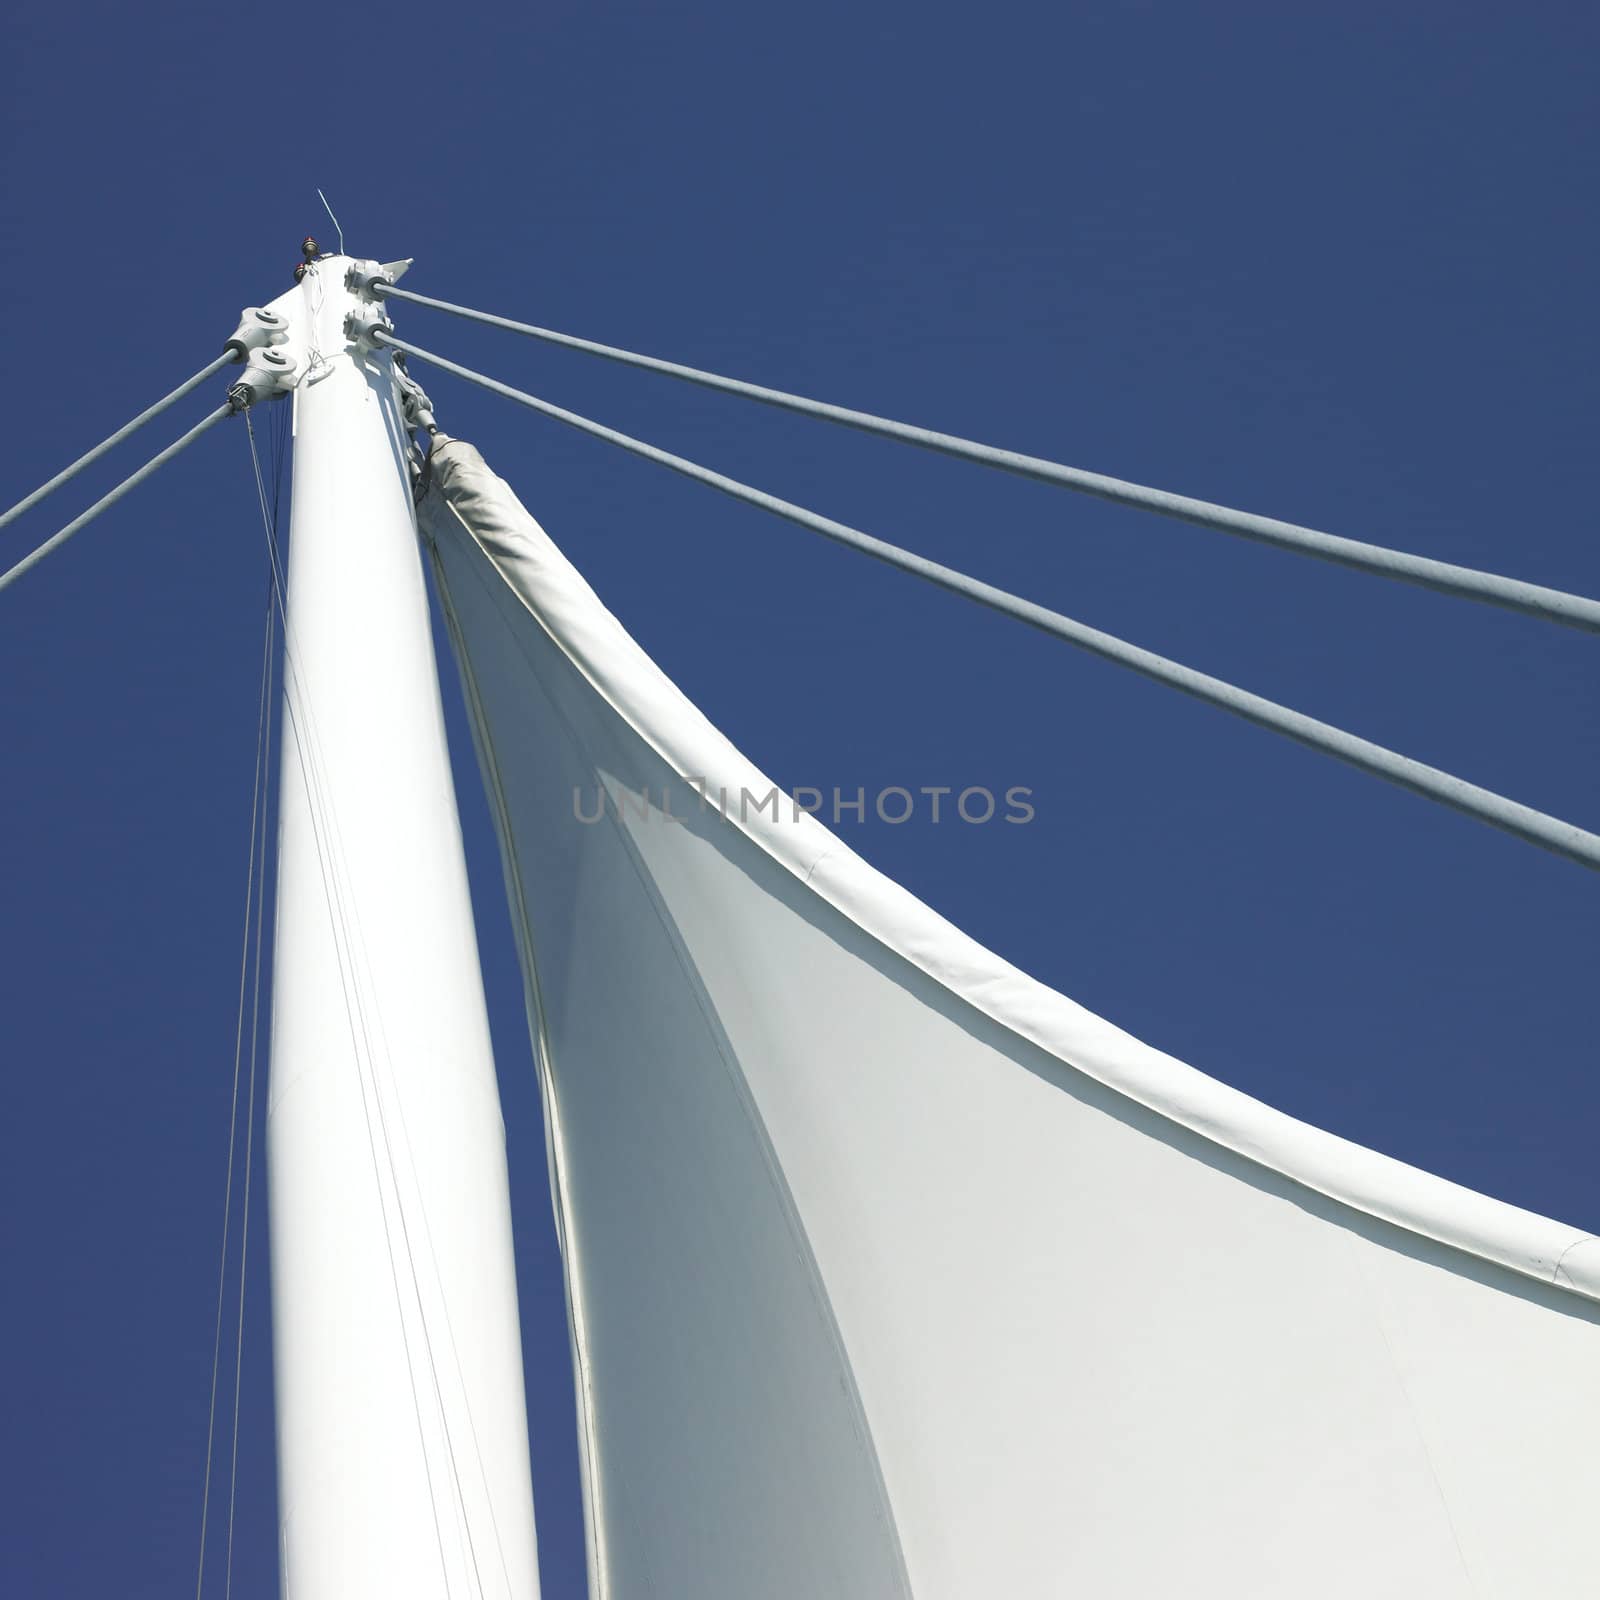 Sails and blue sky by mmm